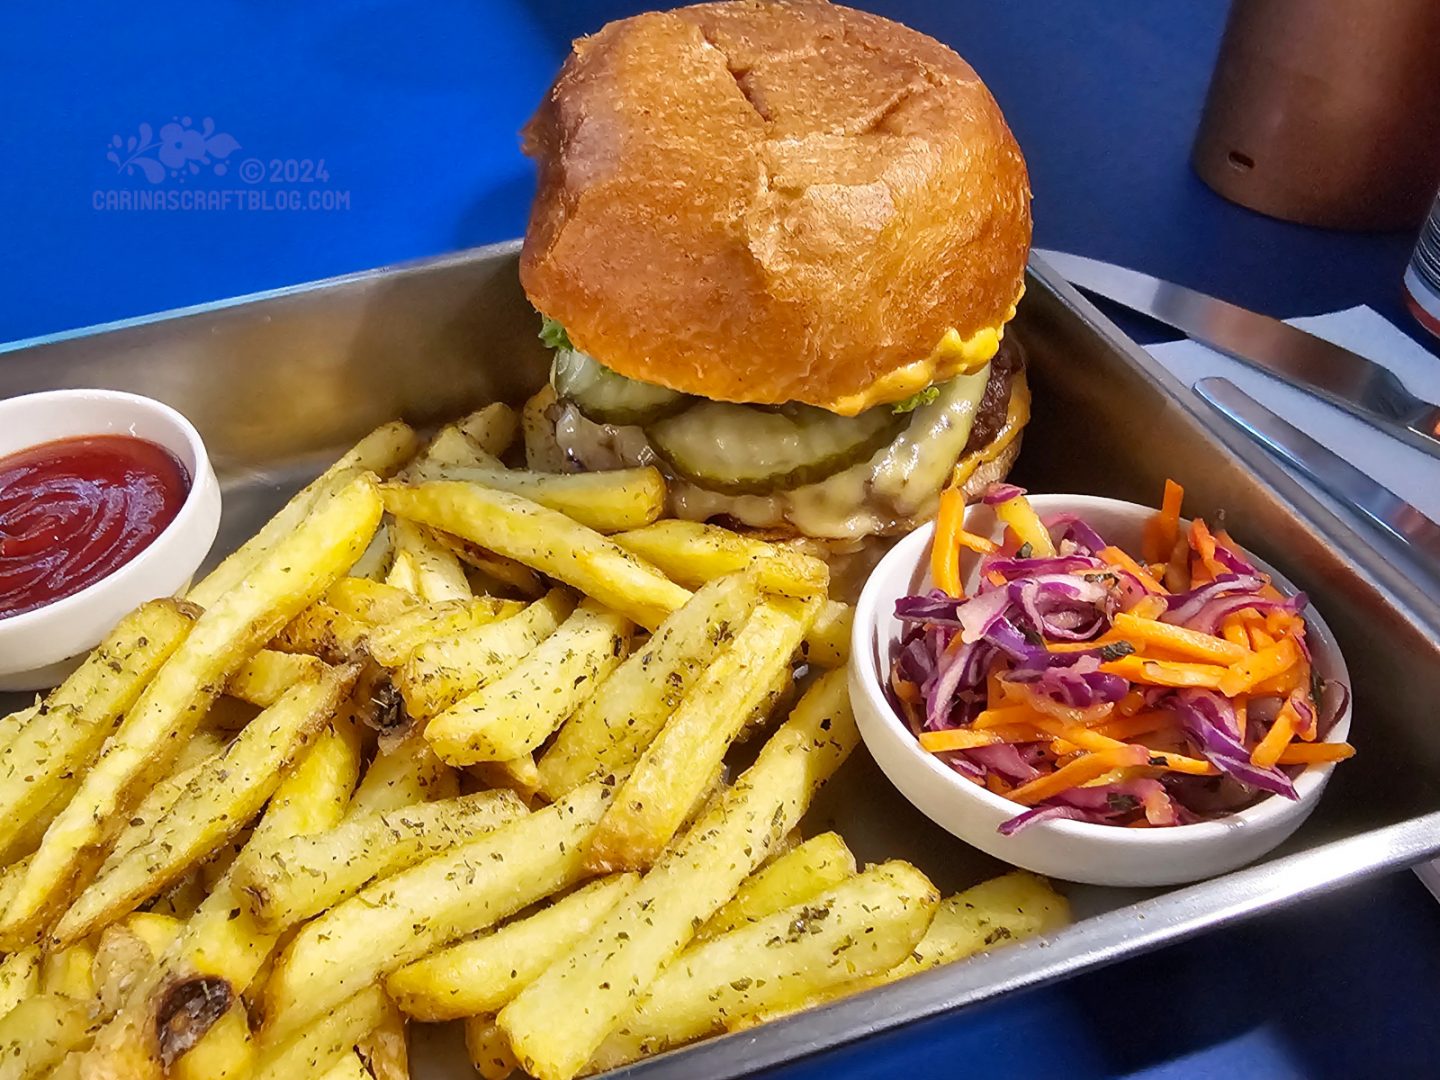 Close view of a metal tray with fries, a burger and a small bowl of shredded carrots and red cabbage.